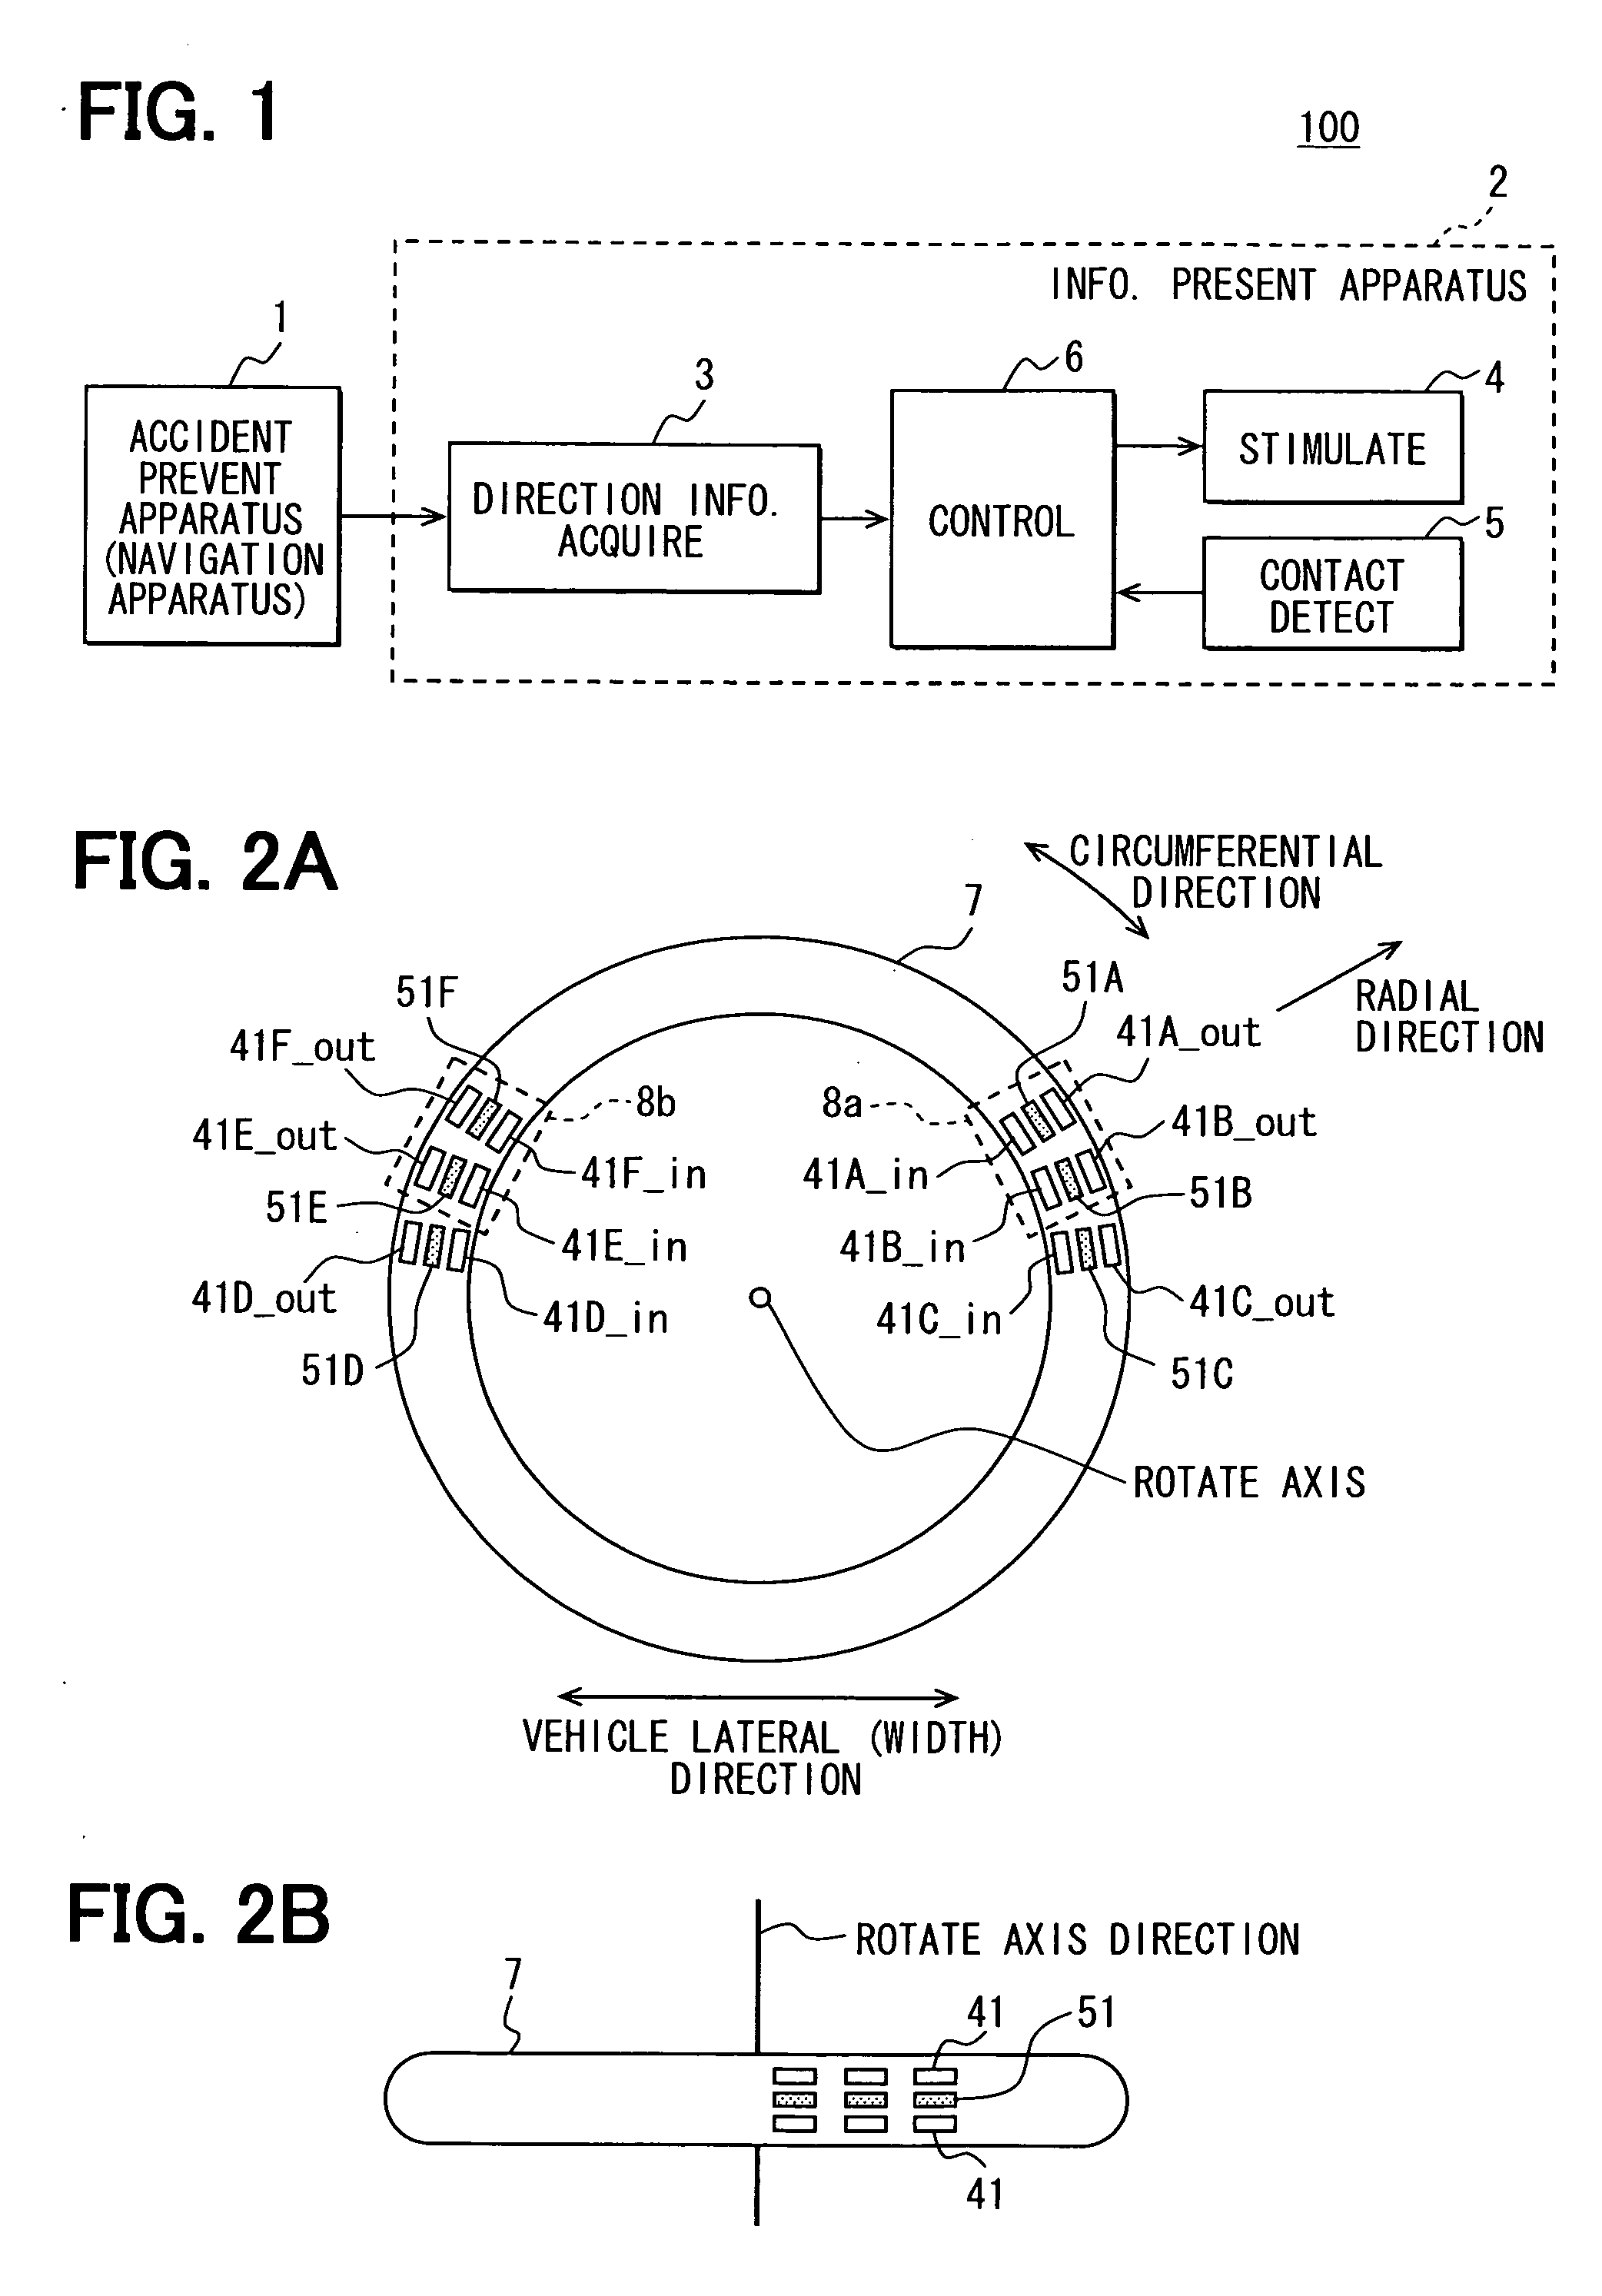 Information presentation apparatus and system